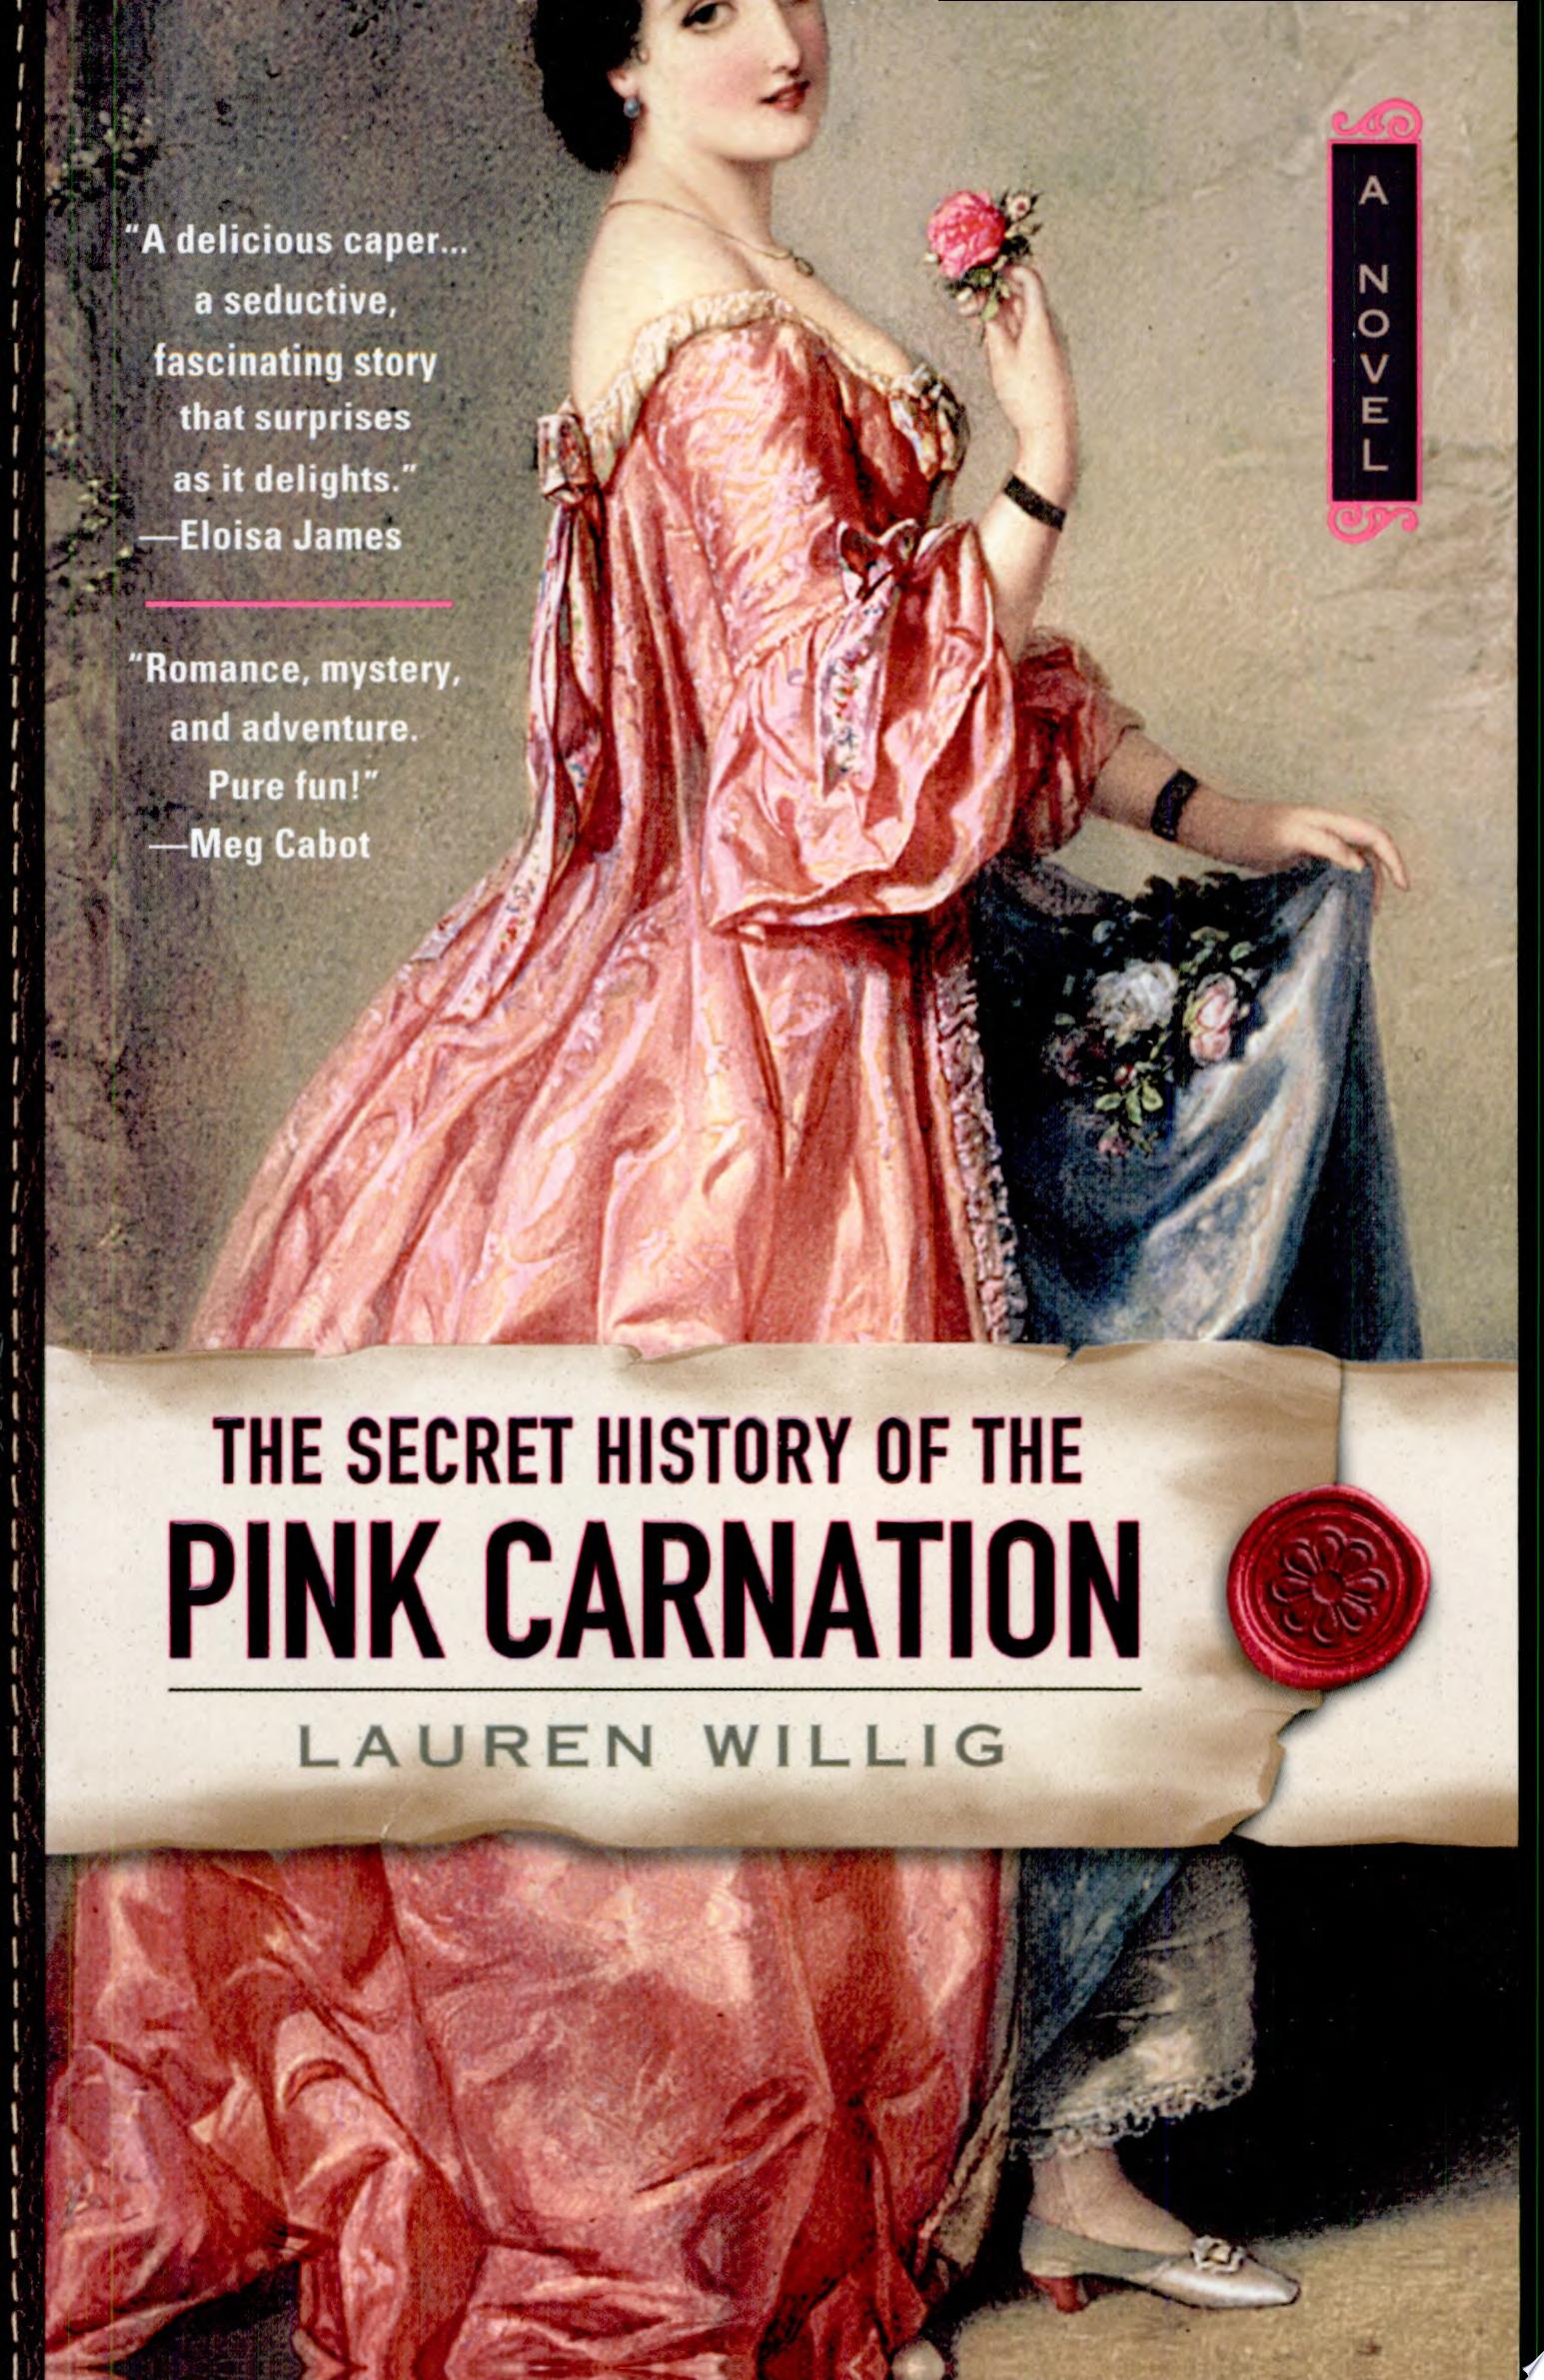 Image for "The Secret History of the Pink Carnation"